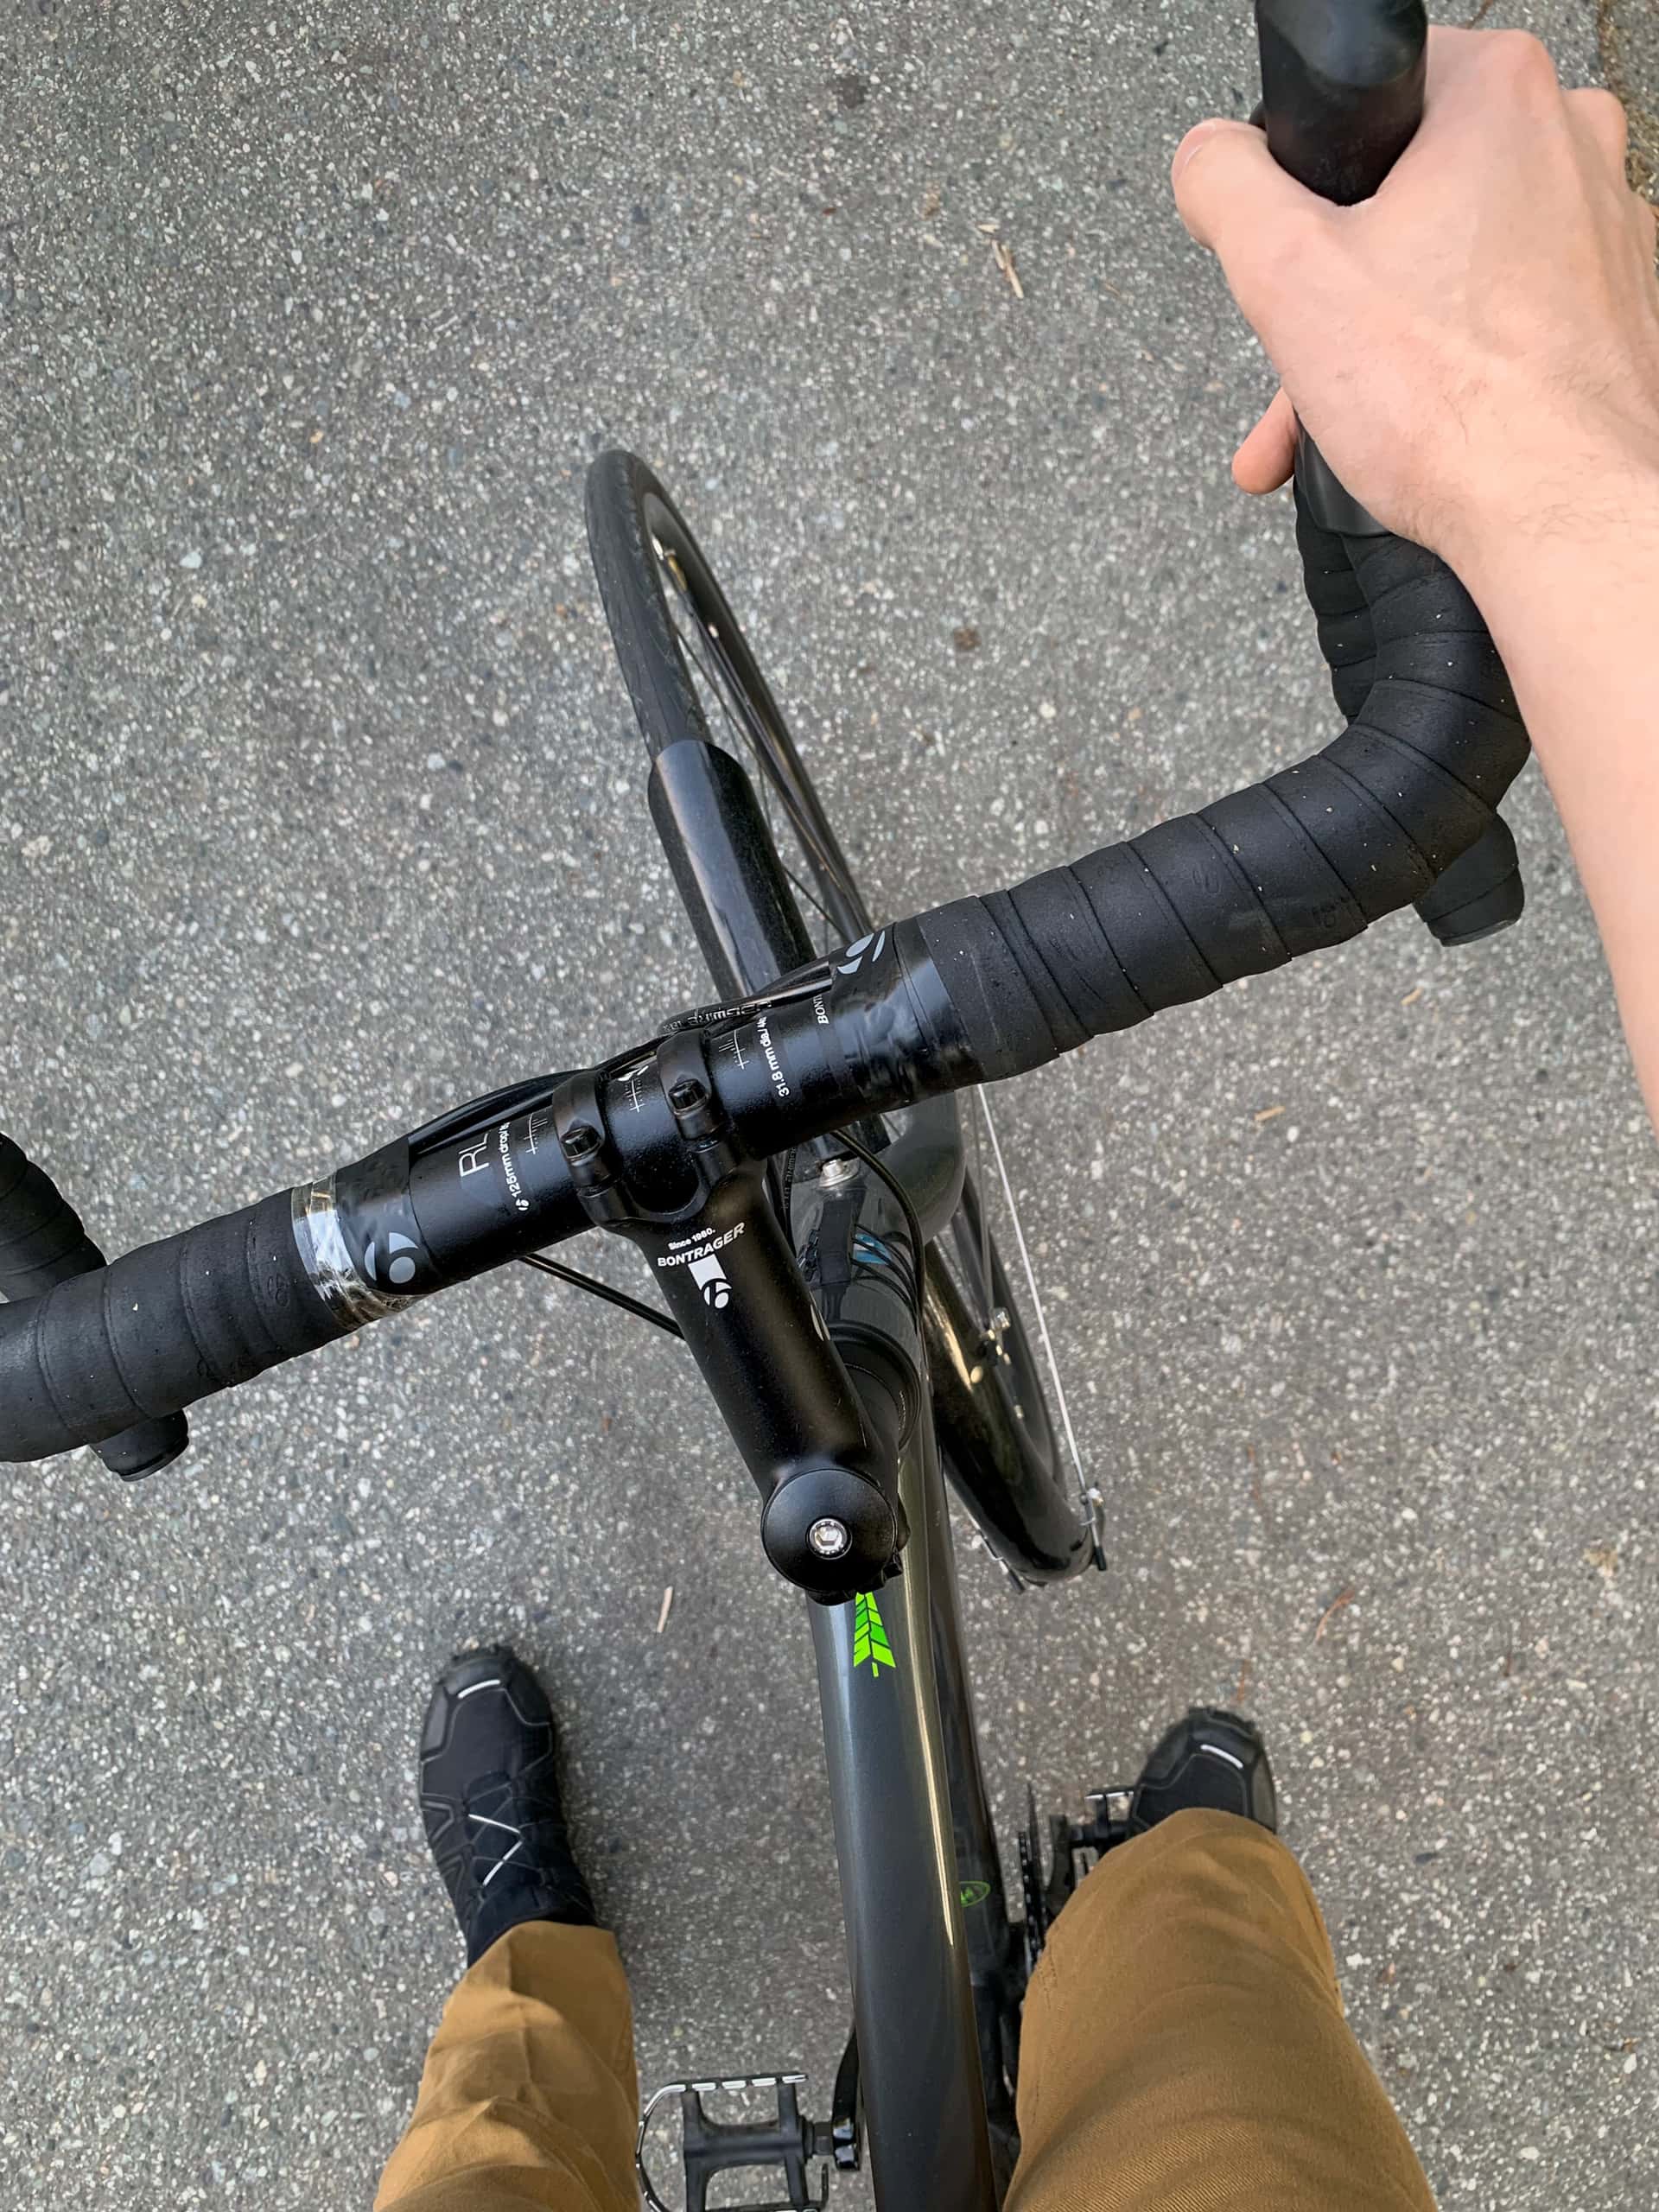 first-person perspective of straddling a bicycle